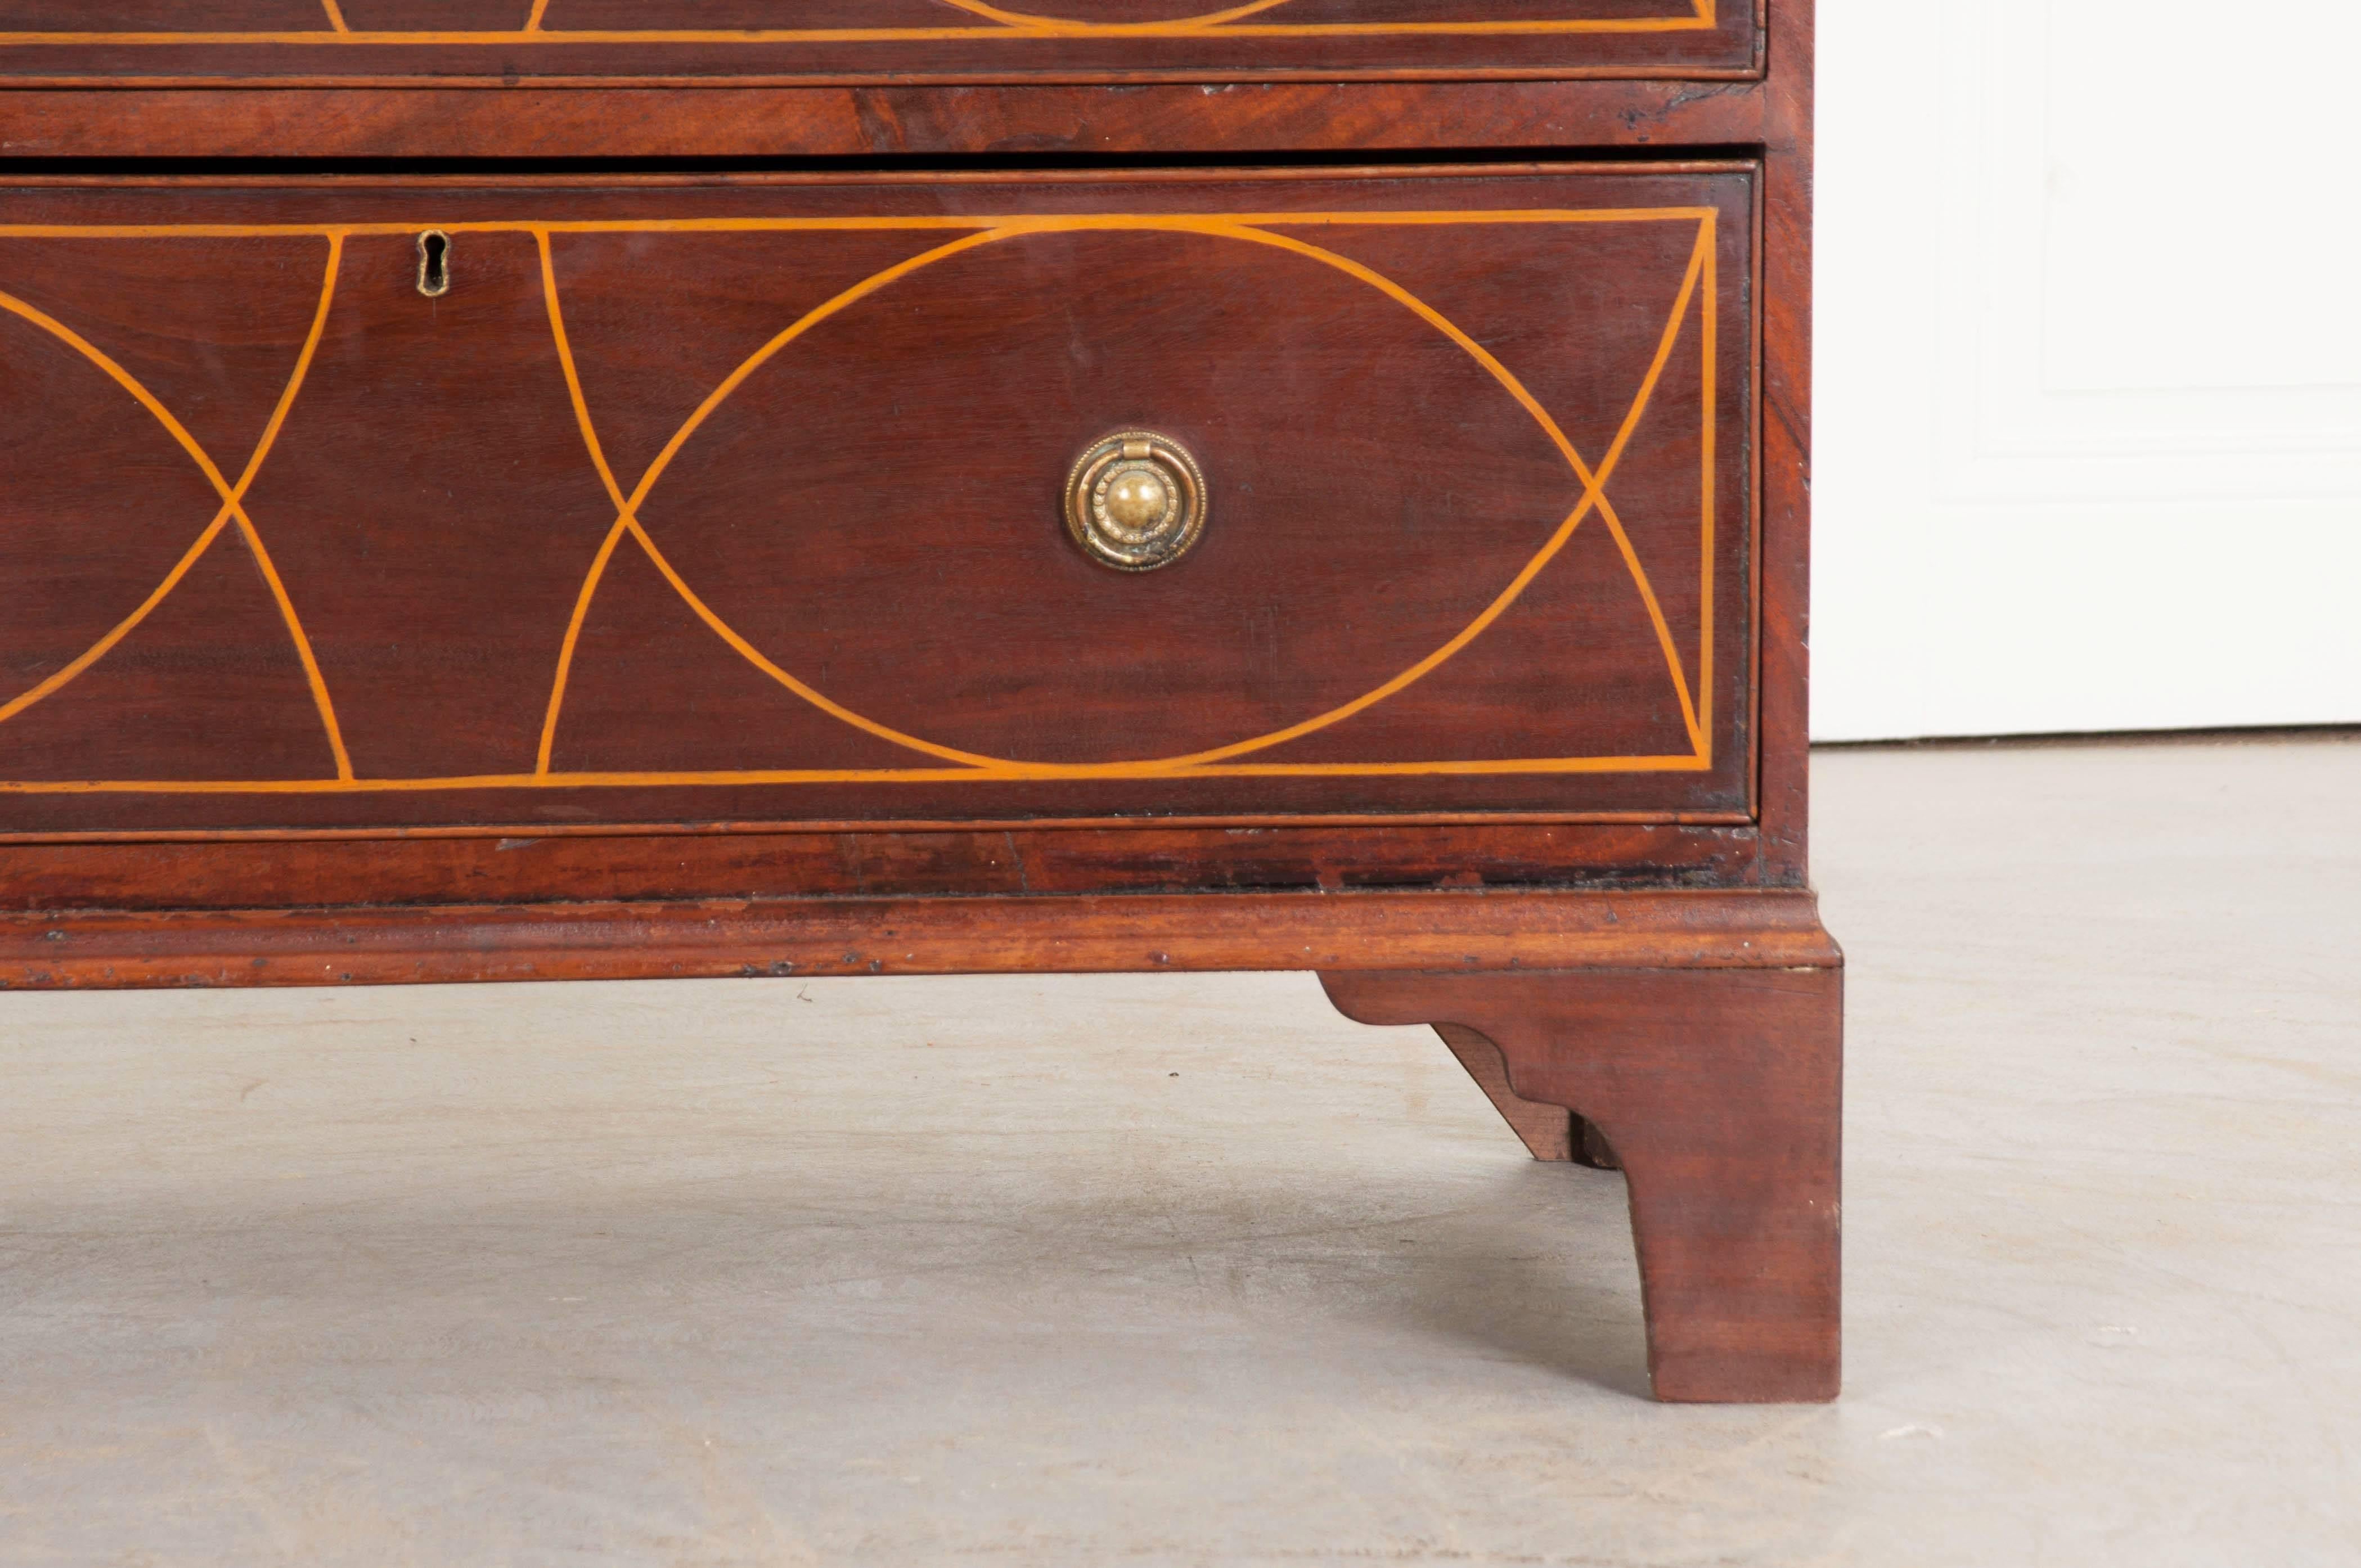 This magnificent five-drawer mahogany chest of drawers was made in England at the beginning of the 19th century. The classically styled antique chest features large semicircular-shaped arches that cross to form a fascinating design that seems to